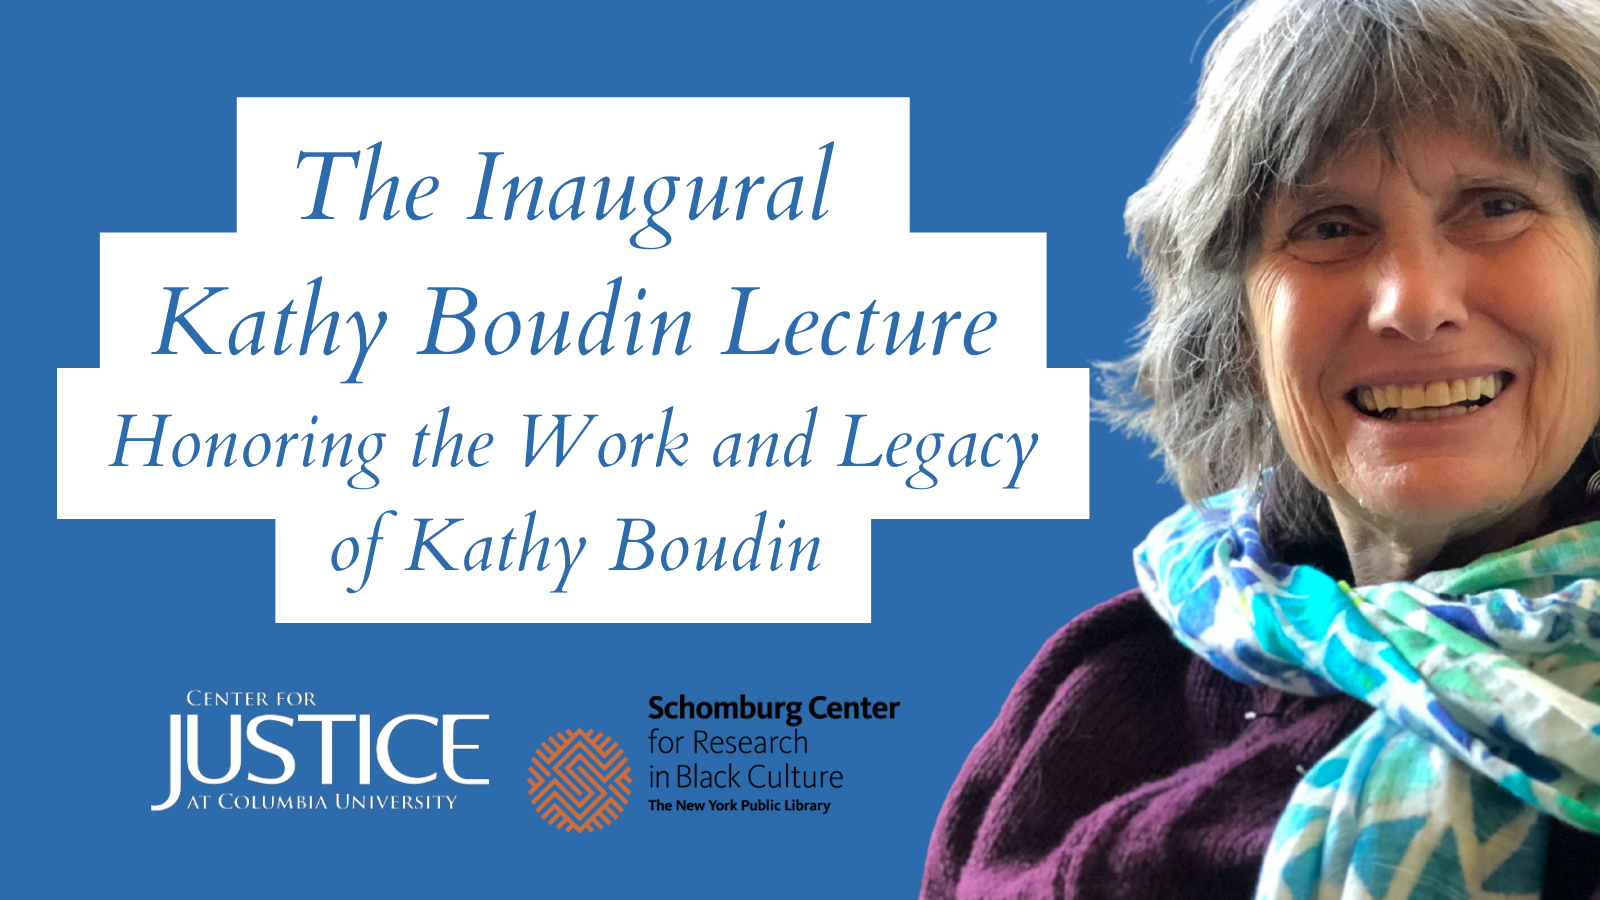 The Inaugural Kathy Boudin Lecture: Honoring the work and legacy of Kathy Boudin